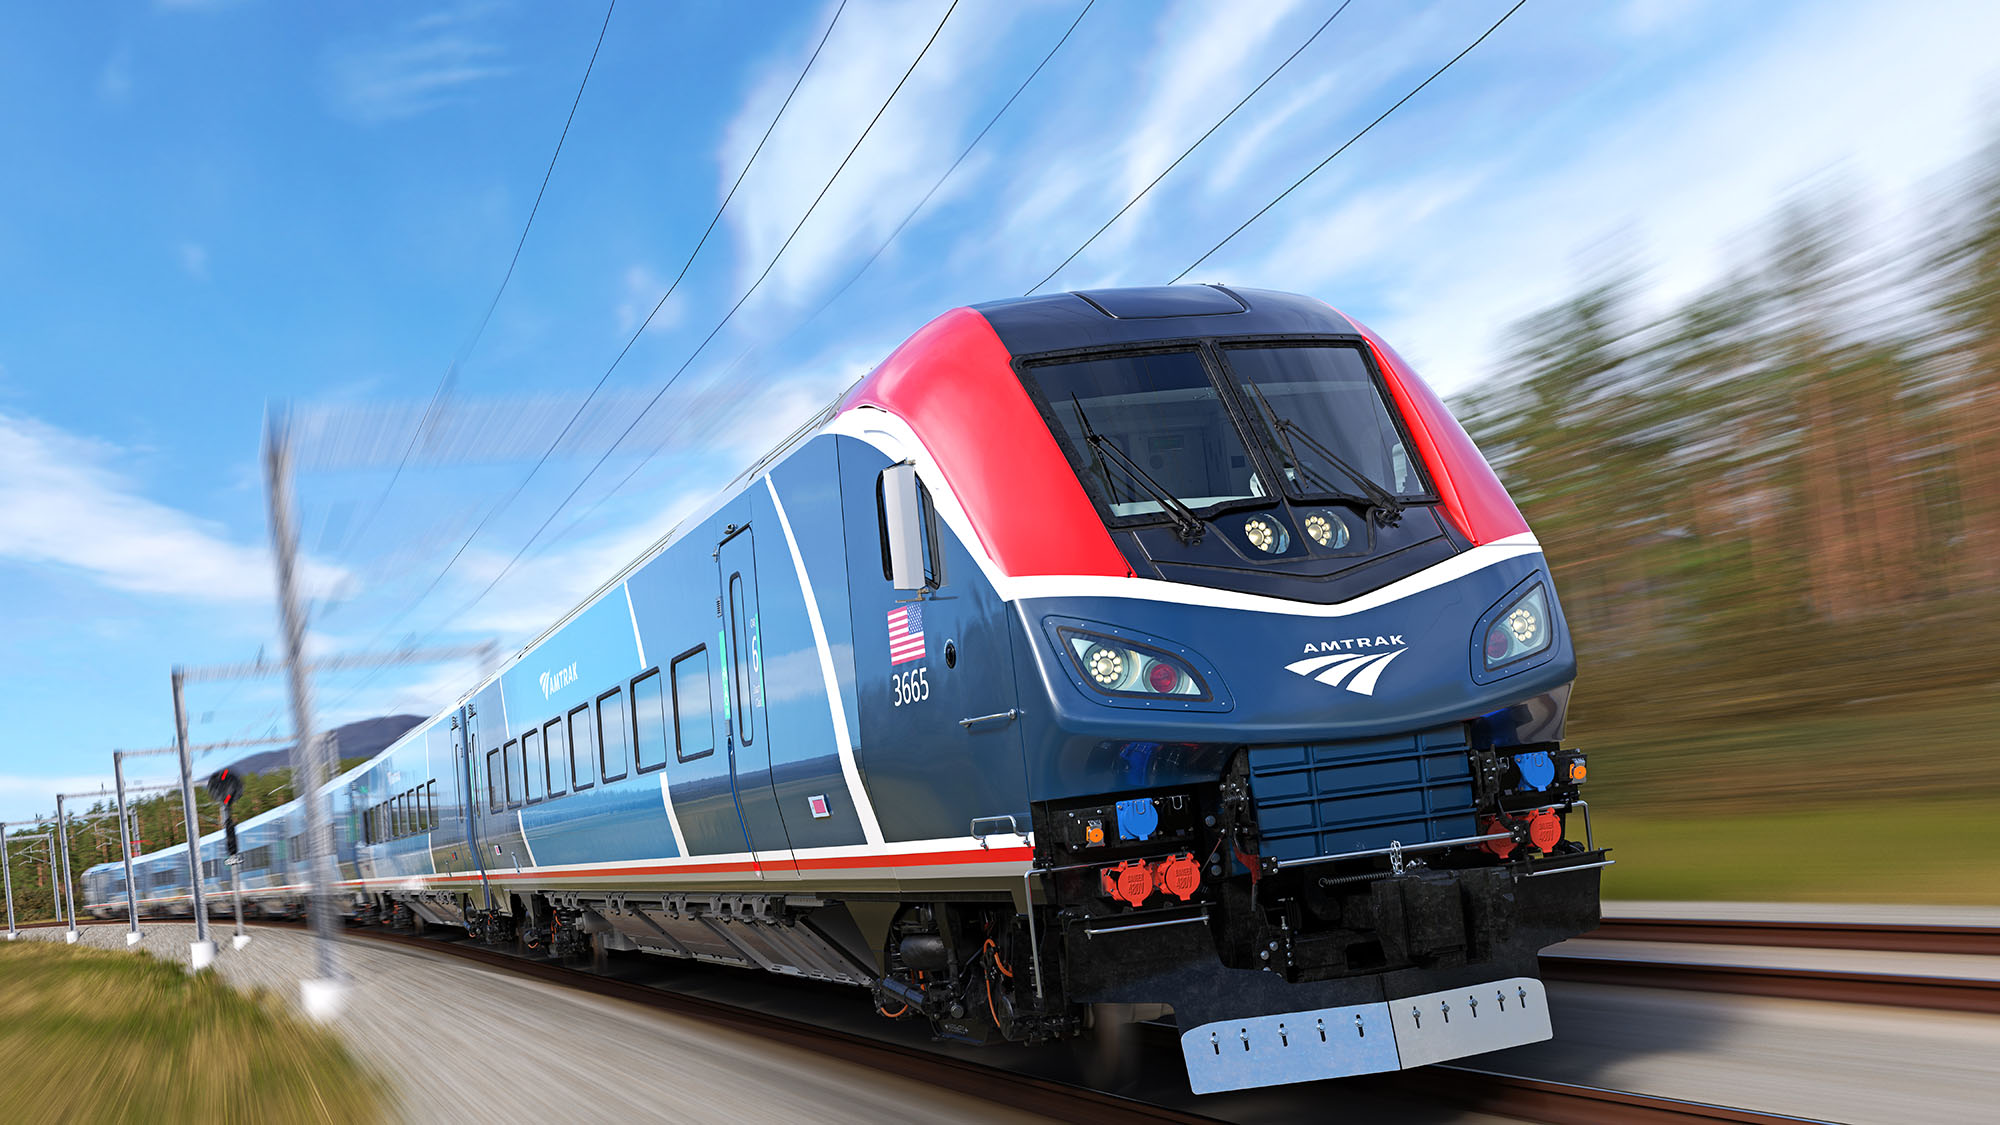 With 10 more trainsets, 83 total Amtrak Airo units will help transform passenger rail travel in the US